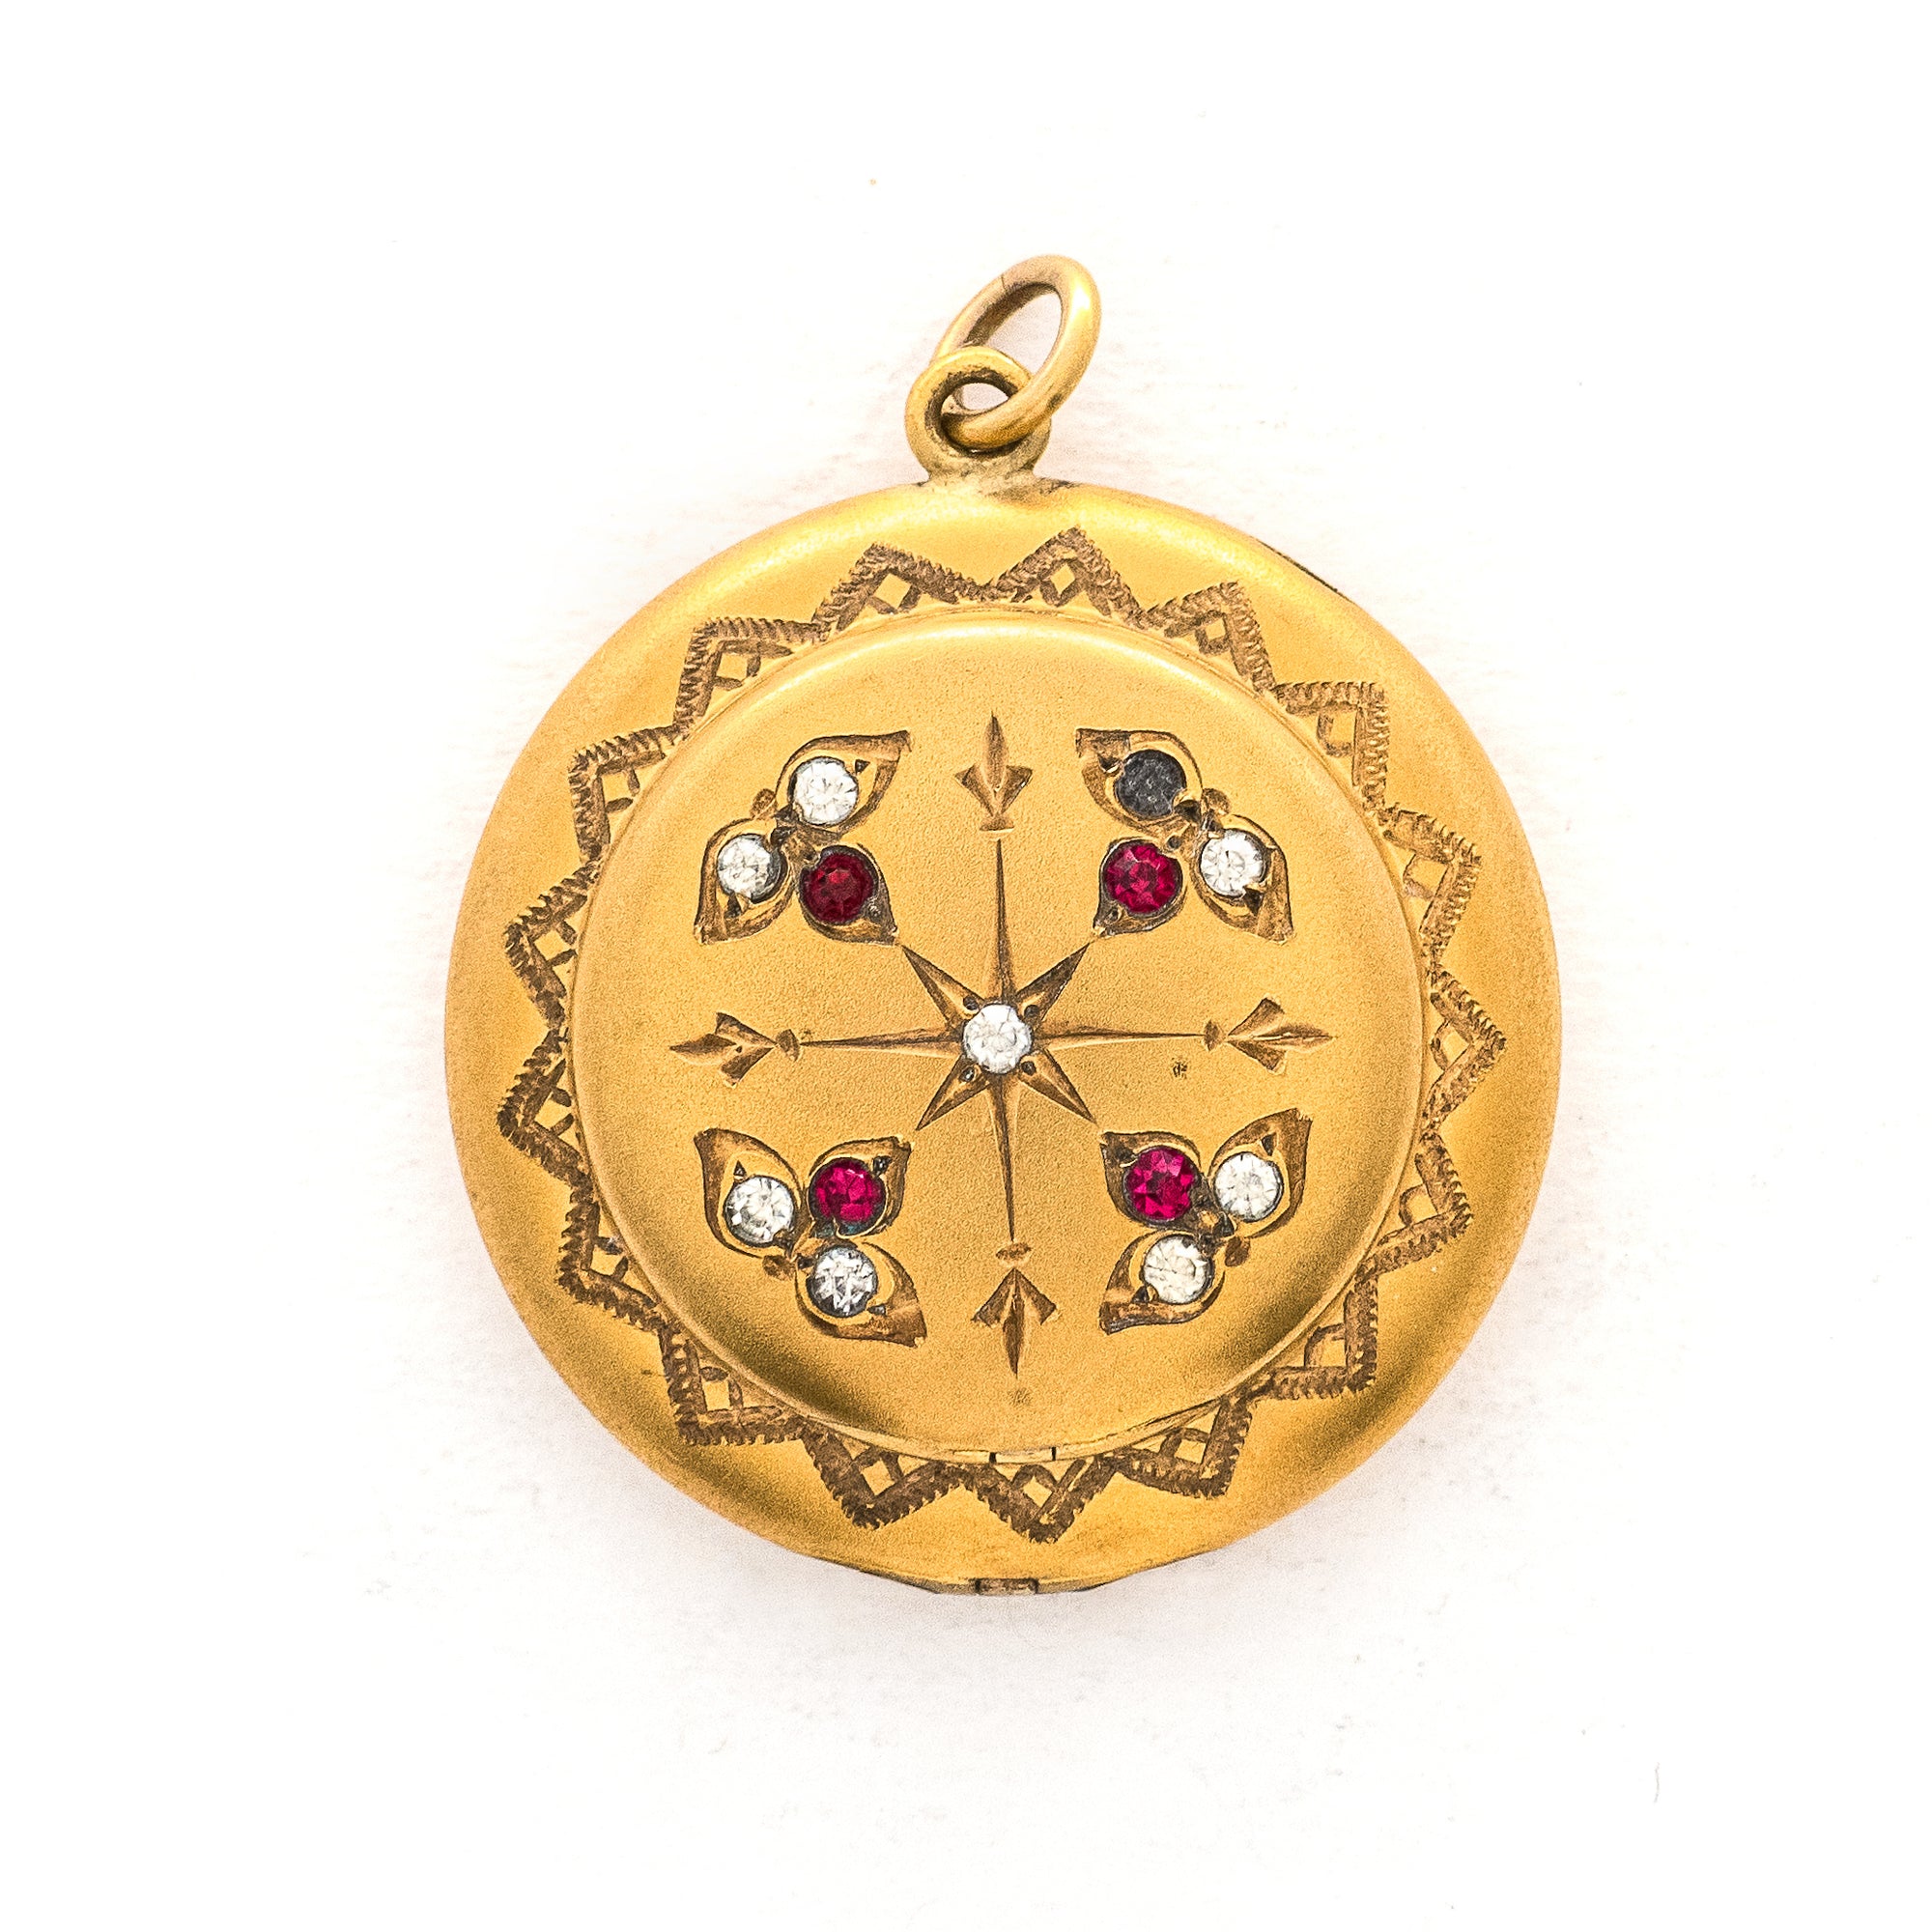 This incredibly unique gold fill locket features red and white paste stones surrounding a central starburst. This locket has two compartments: one that holds a photo, original frame included, and a second secret compartment that holds a tiny sachet. The inscribed text inside the locket tells us this design was patent pending (See photos).  We've never seen anything like it! This gem pairs perfectly with one of our antique gold fill chains.  Front locket view